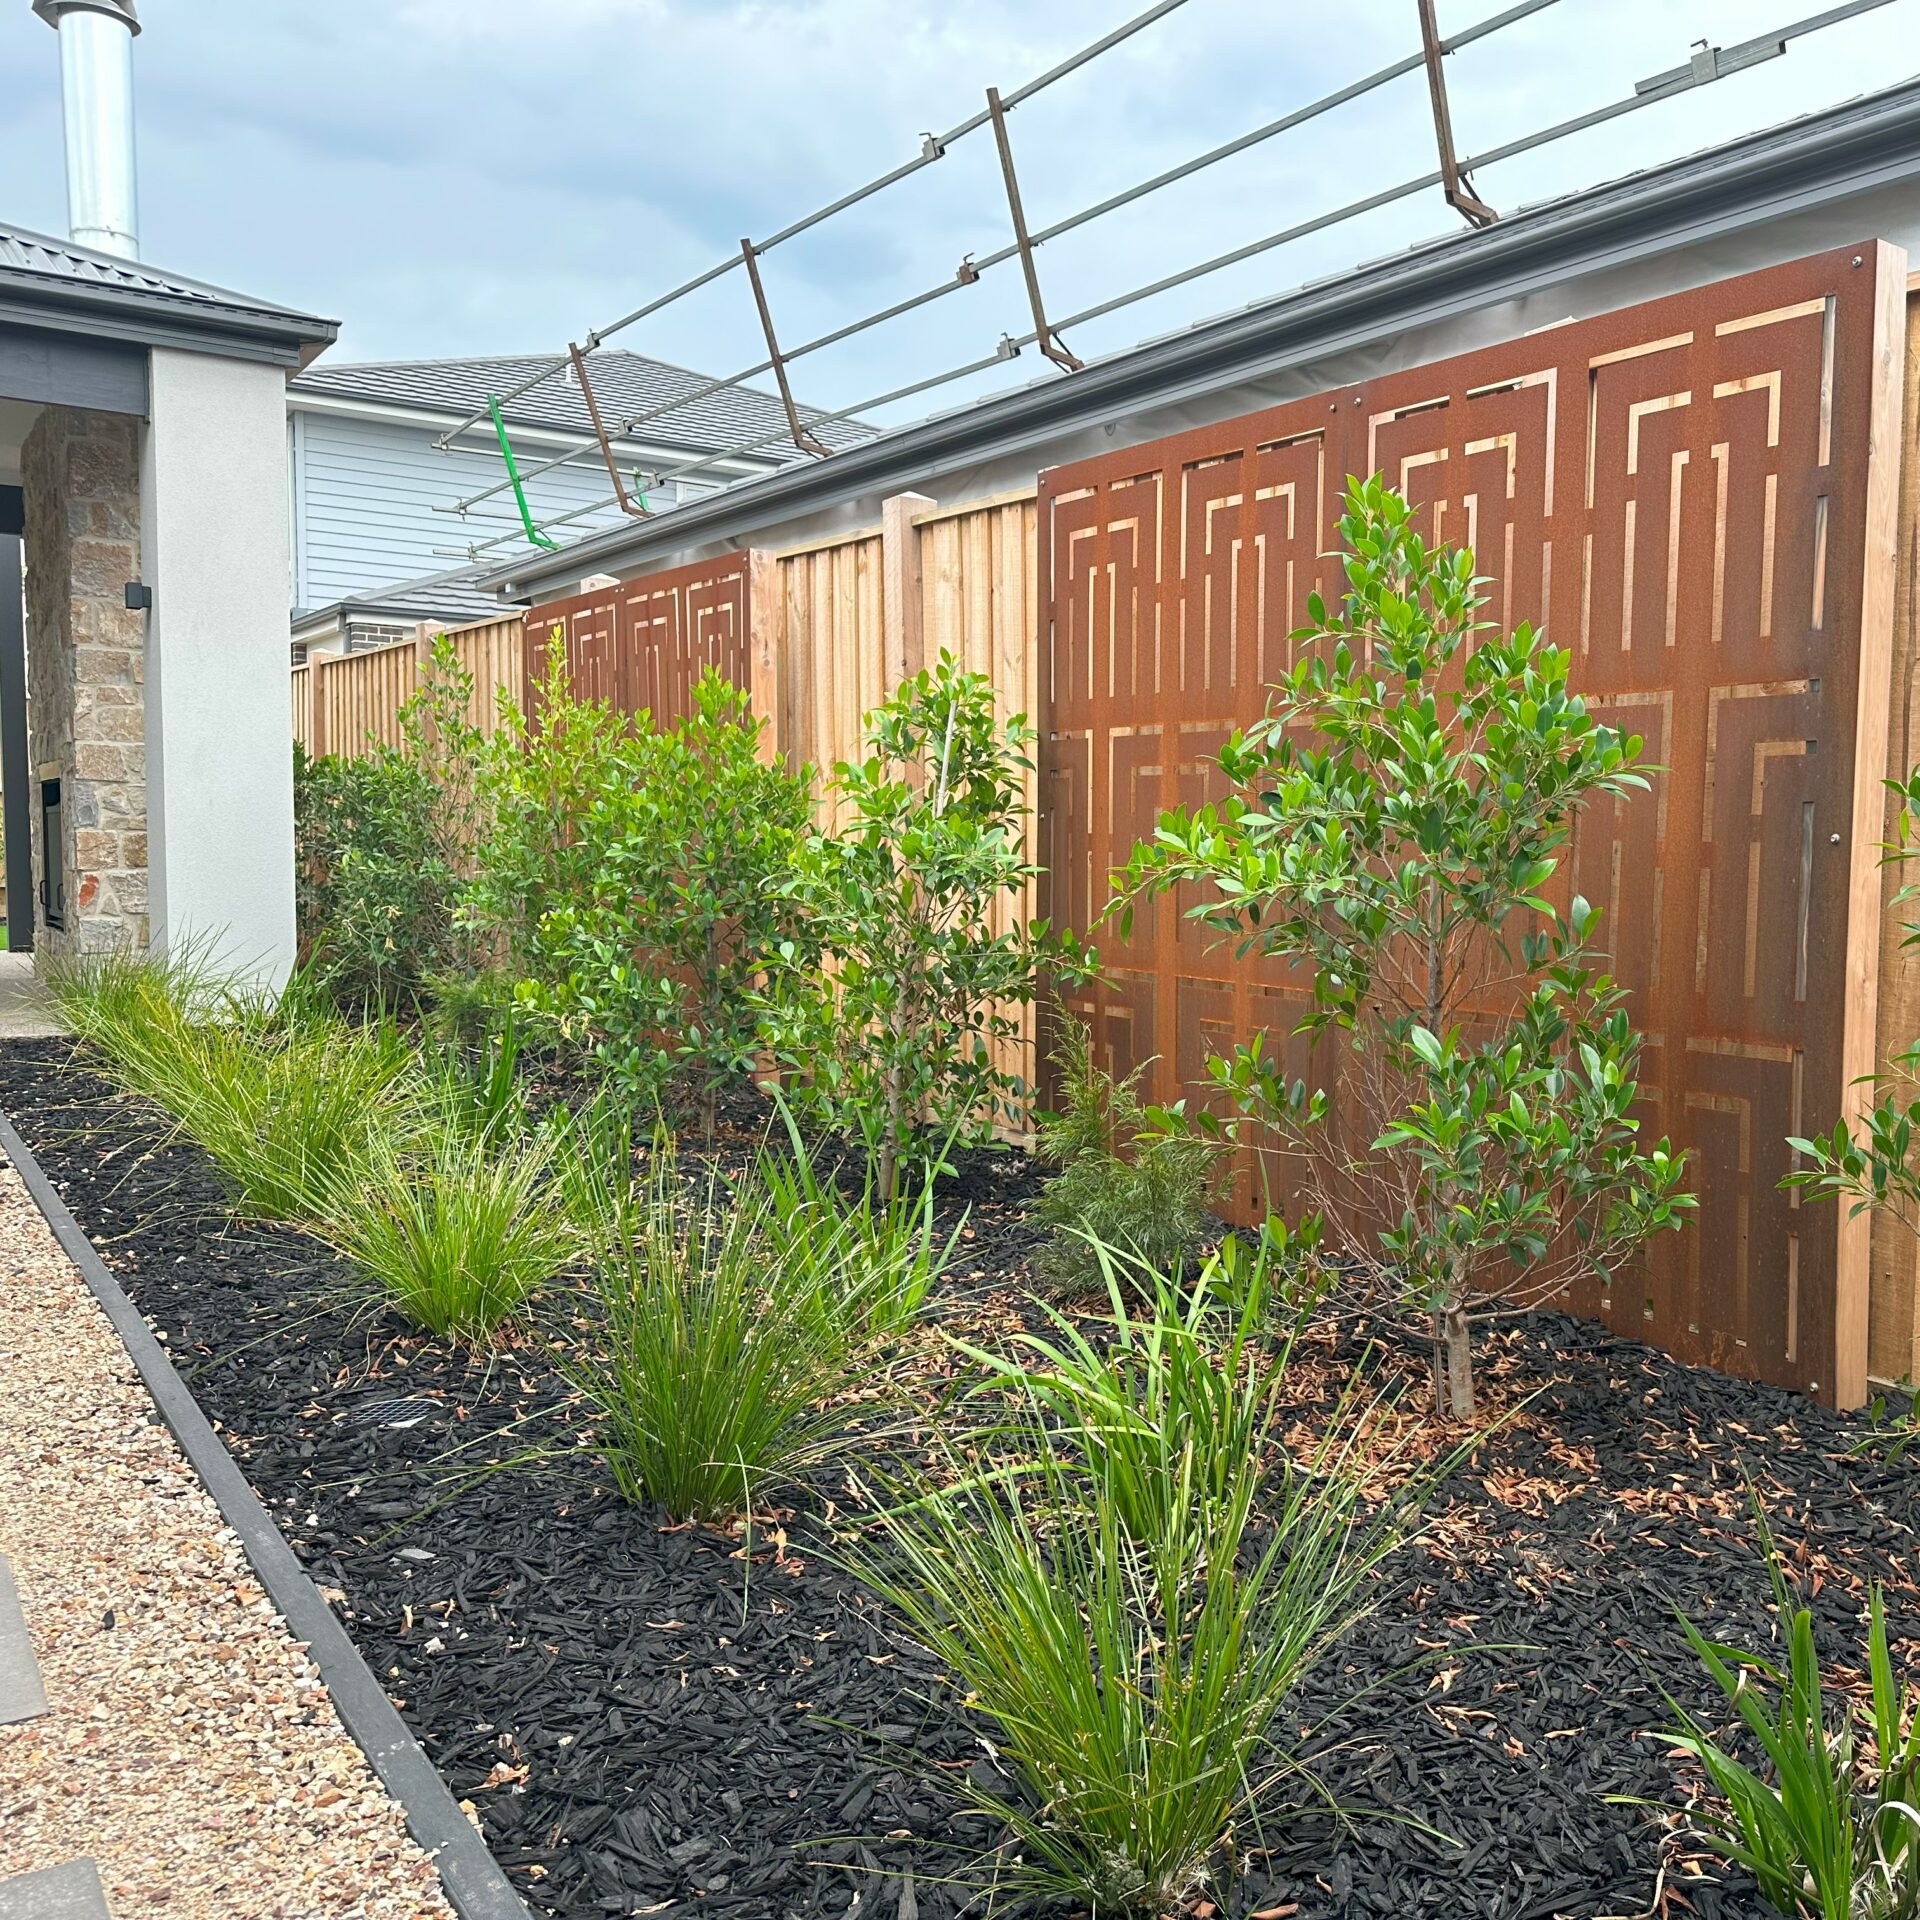 sq steel screens on pailing fence